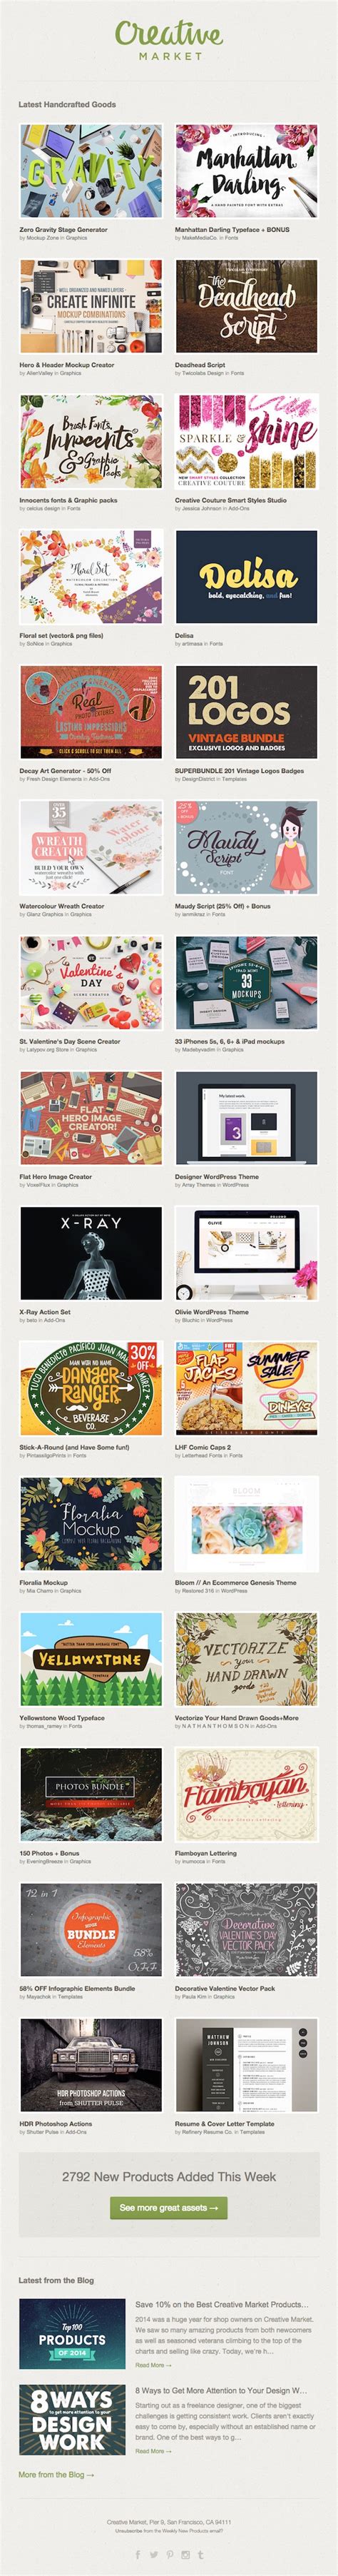 Creative Email News Letter Designs For Your Inspiration Devzum